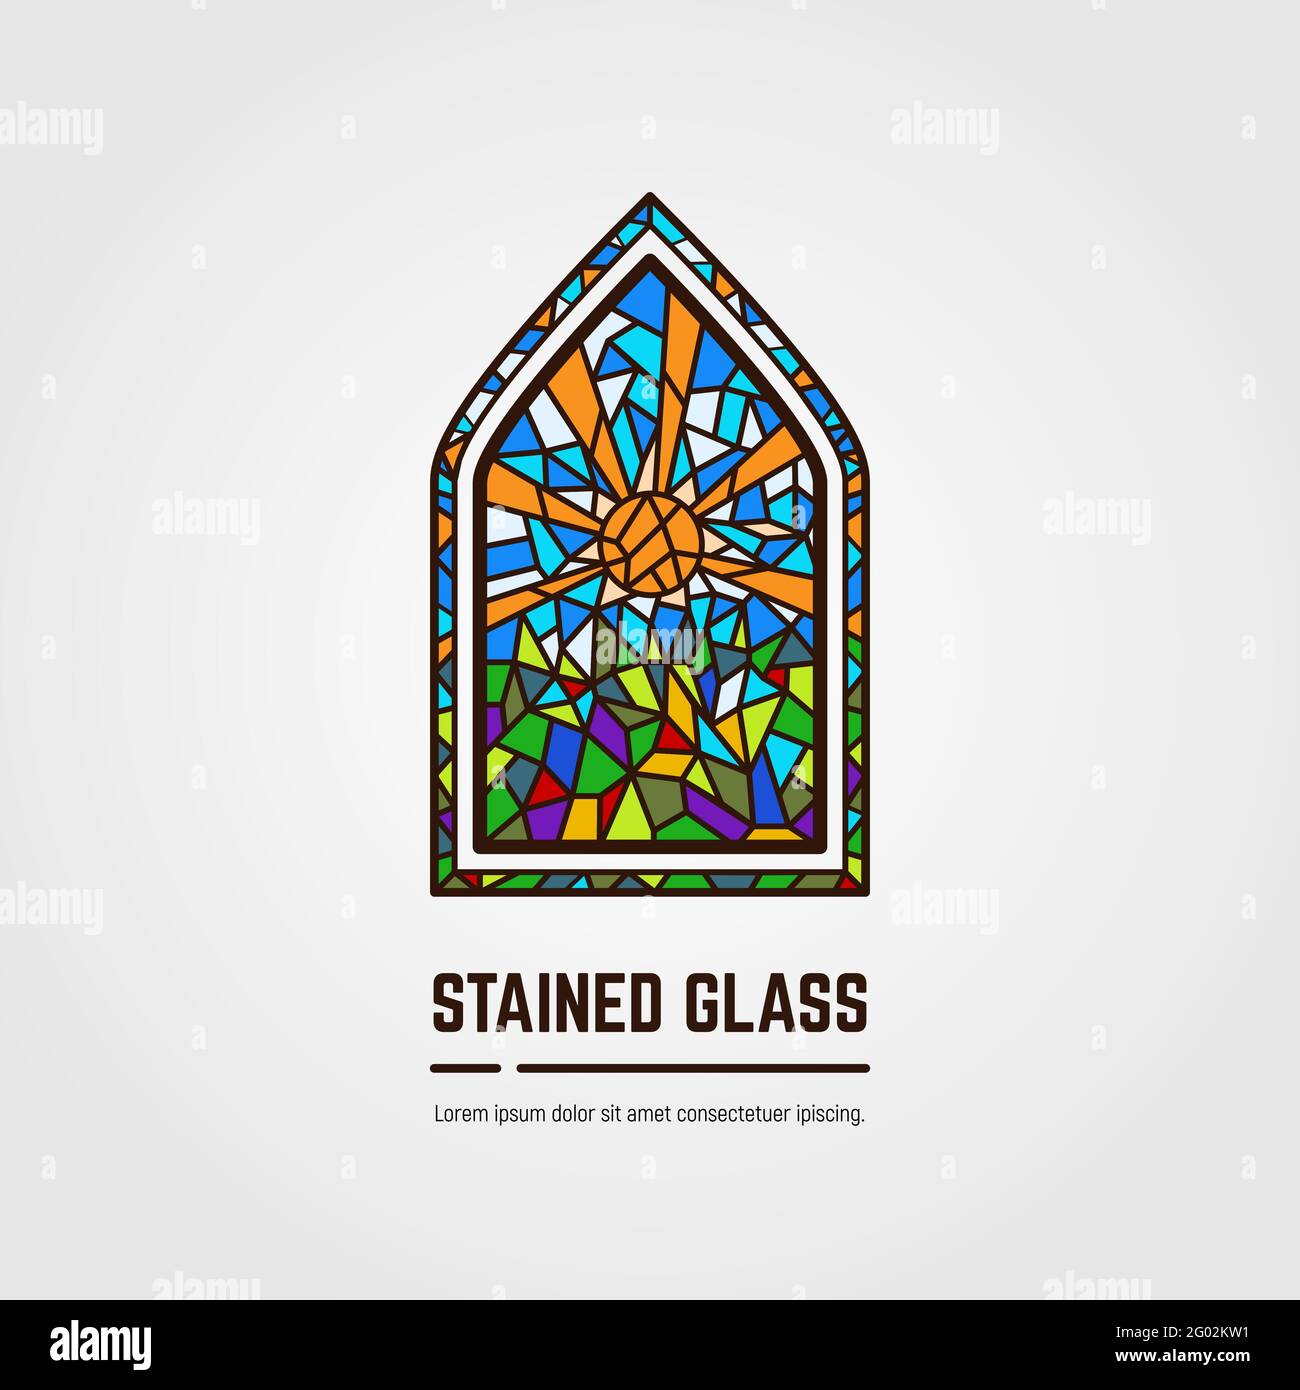 Stained glass line vector Stock Vector